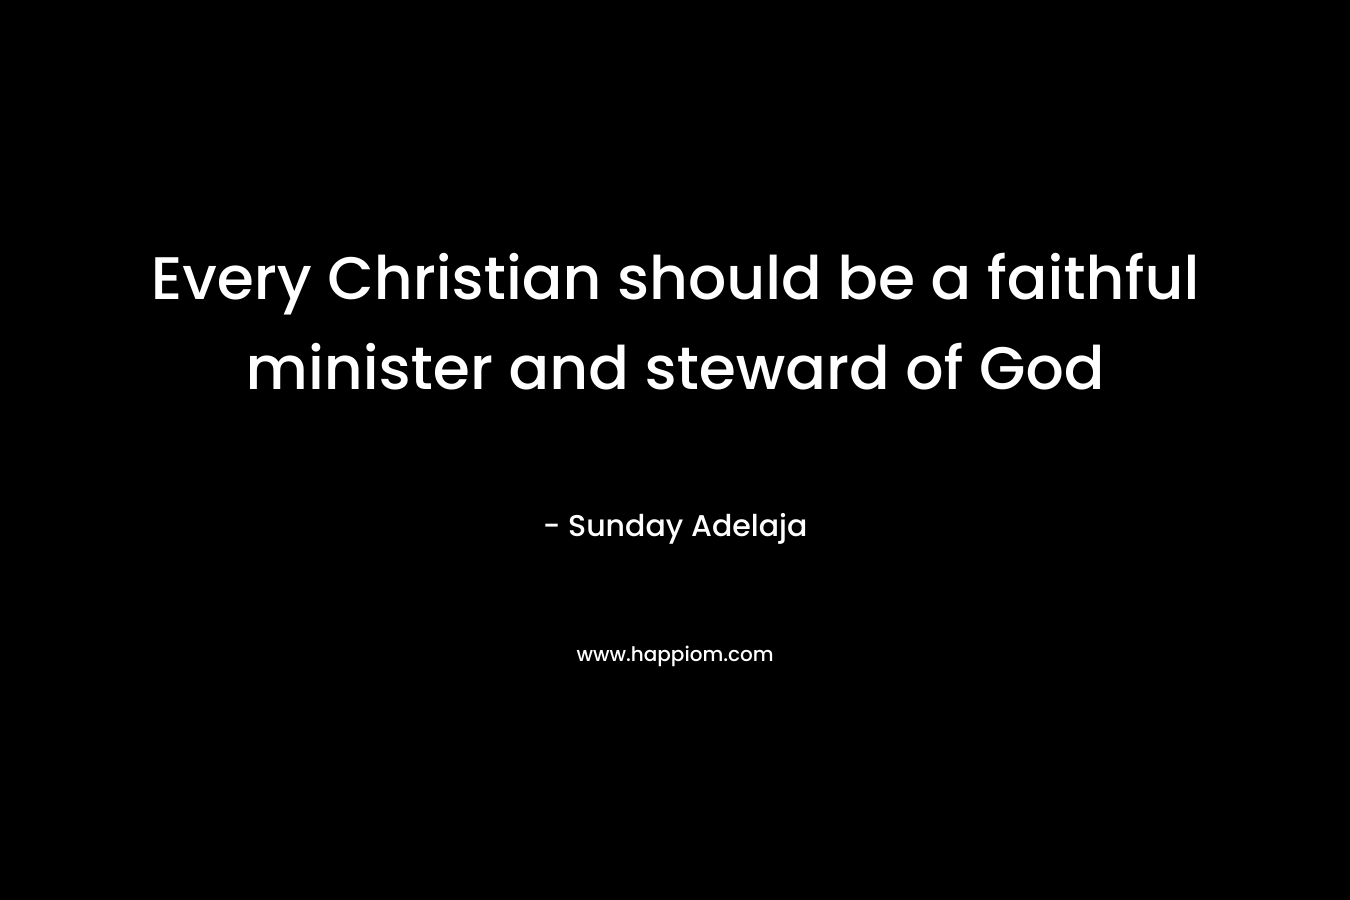 Every Christian should be a faithful minister and steward of God